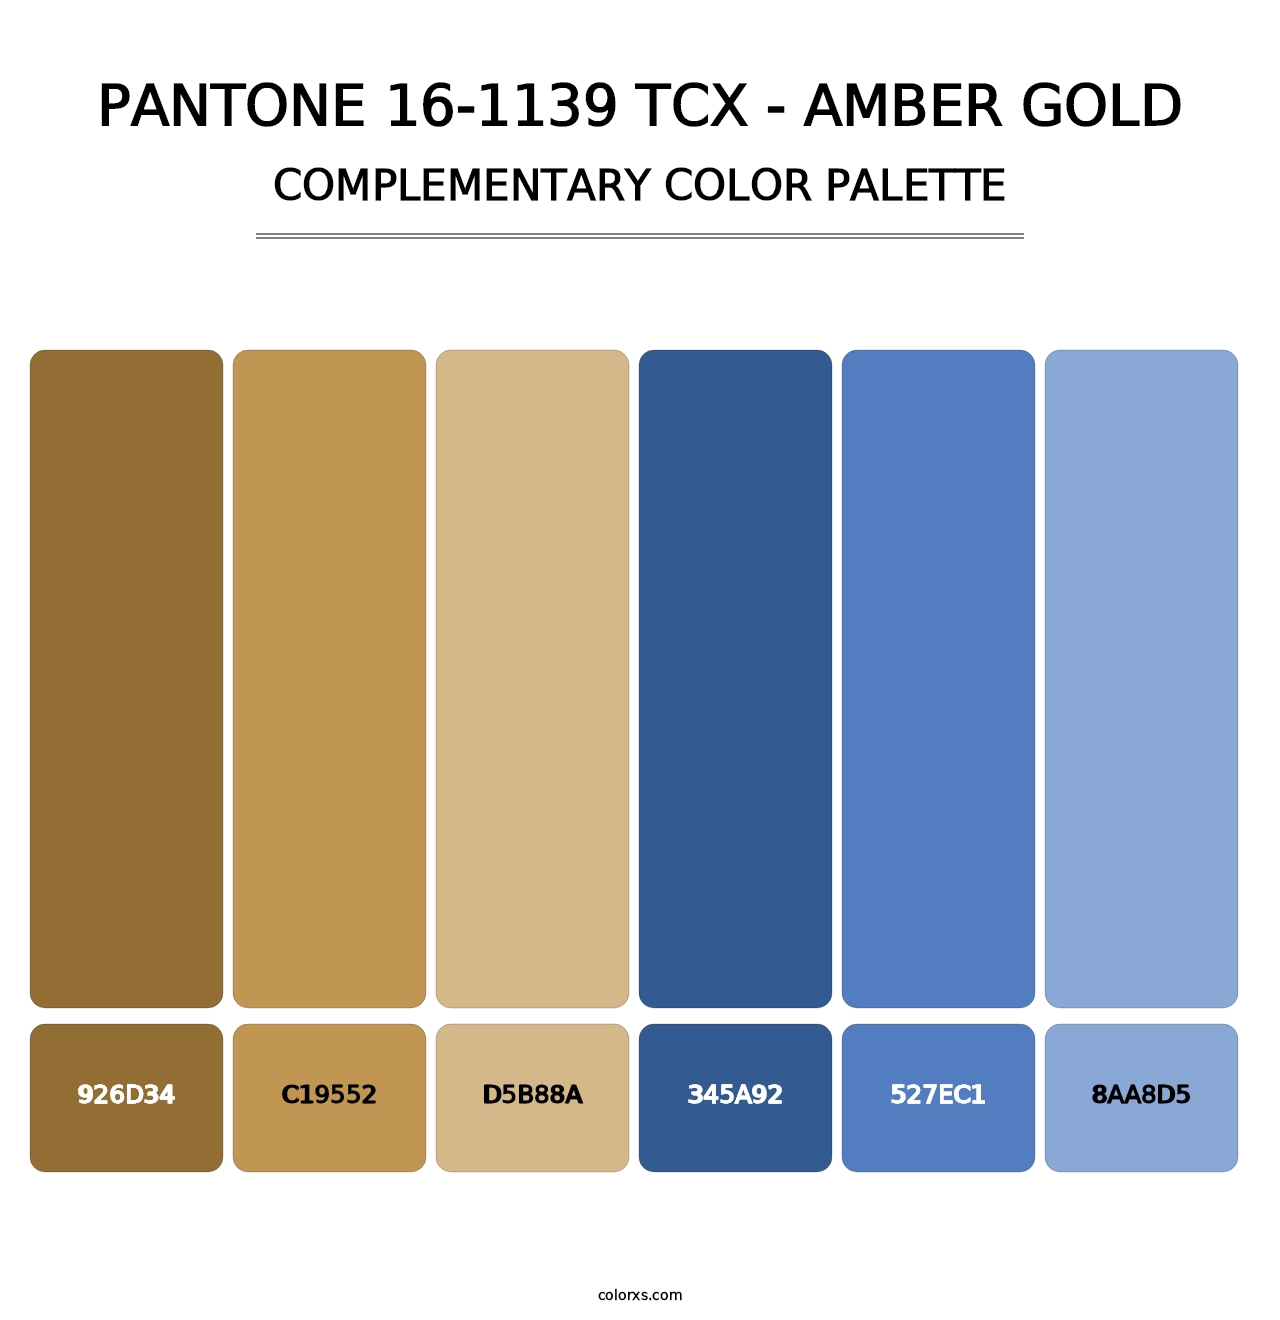 PANTONE 16-1139 TCX - Amber Gold - Complementary Color Palette